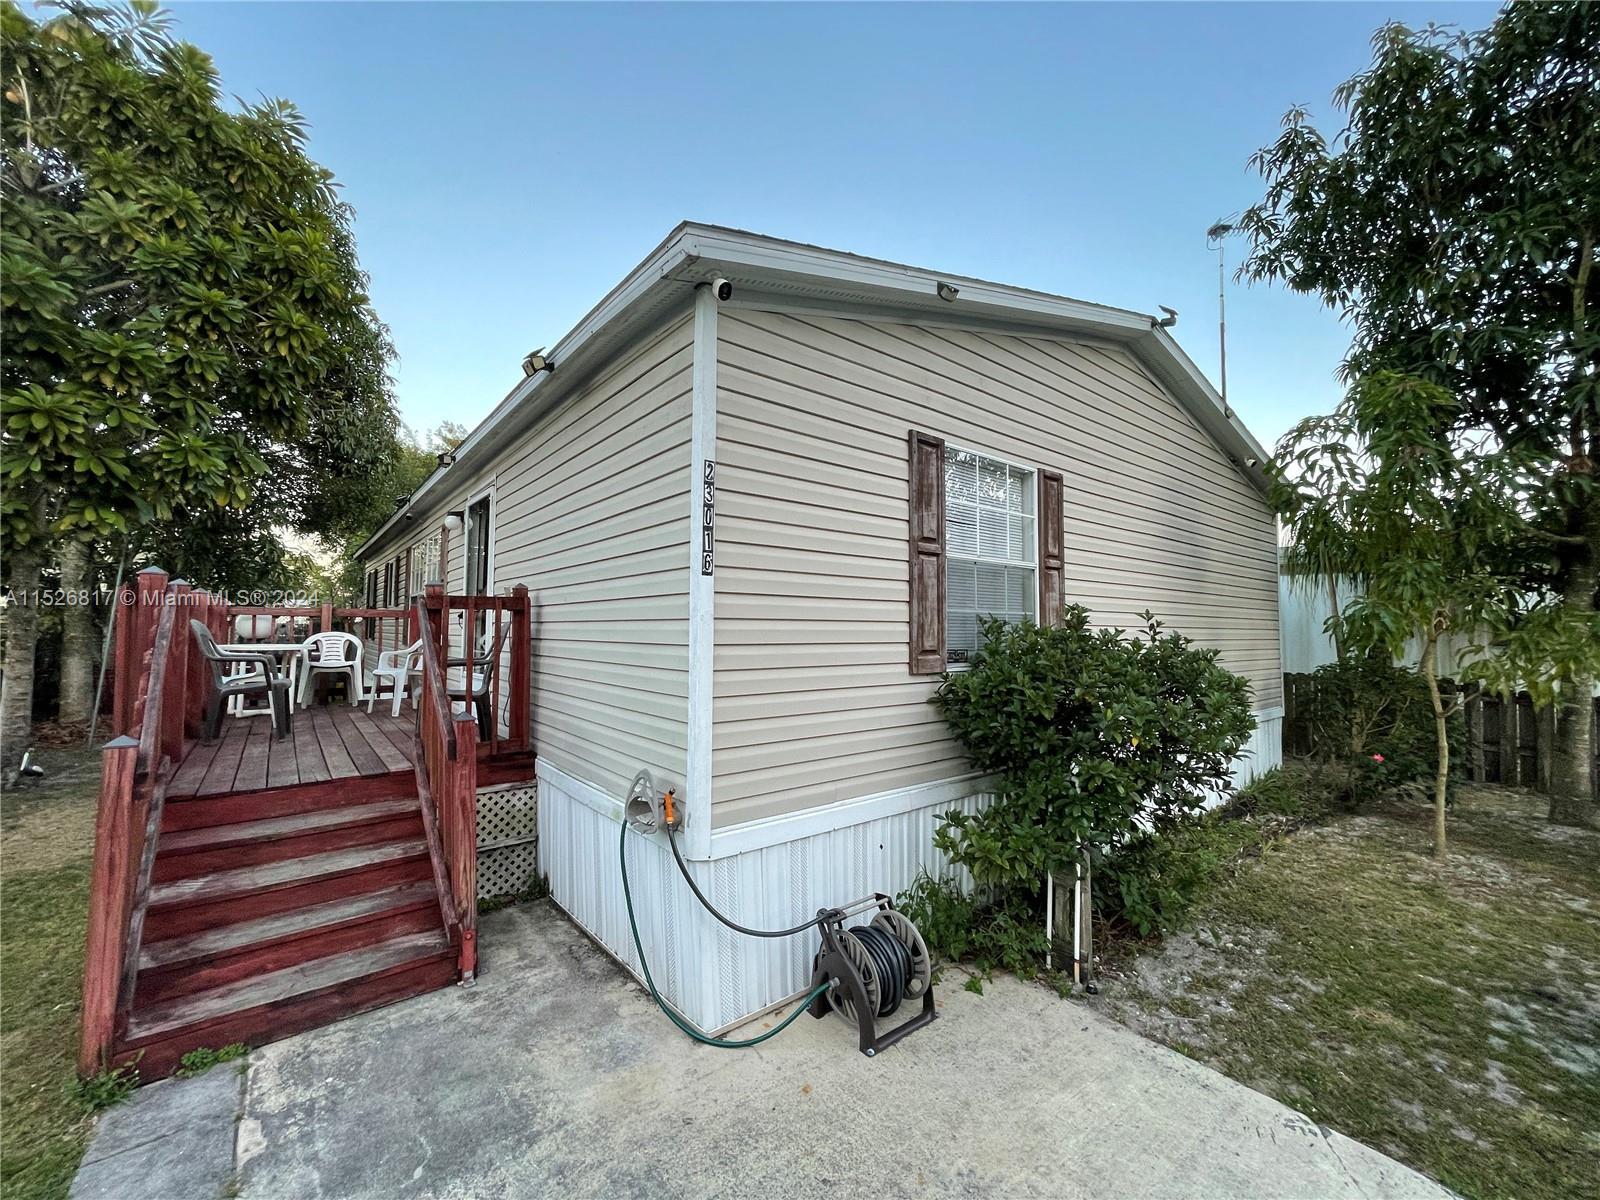 PRICE REDUCED -SELLER MOTIVATED 3 BED AND 2 BATH DOUBLE WIDE MOBILE HOME - A/C 2021 - WATER HEATER 2